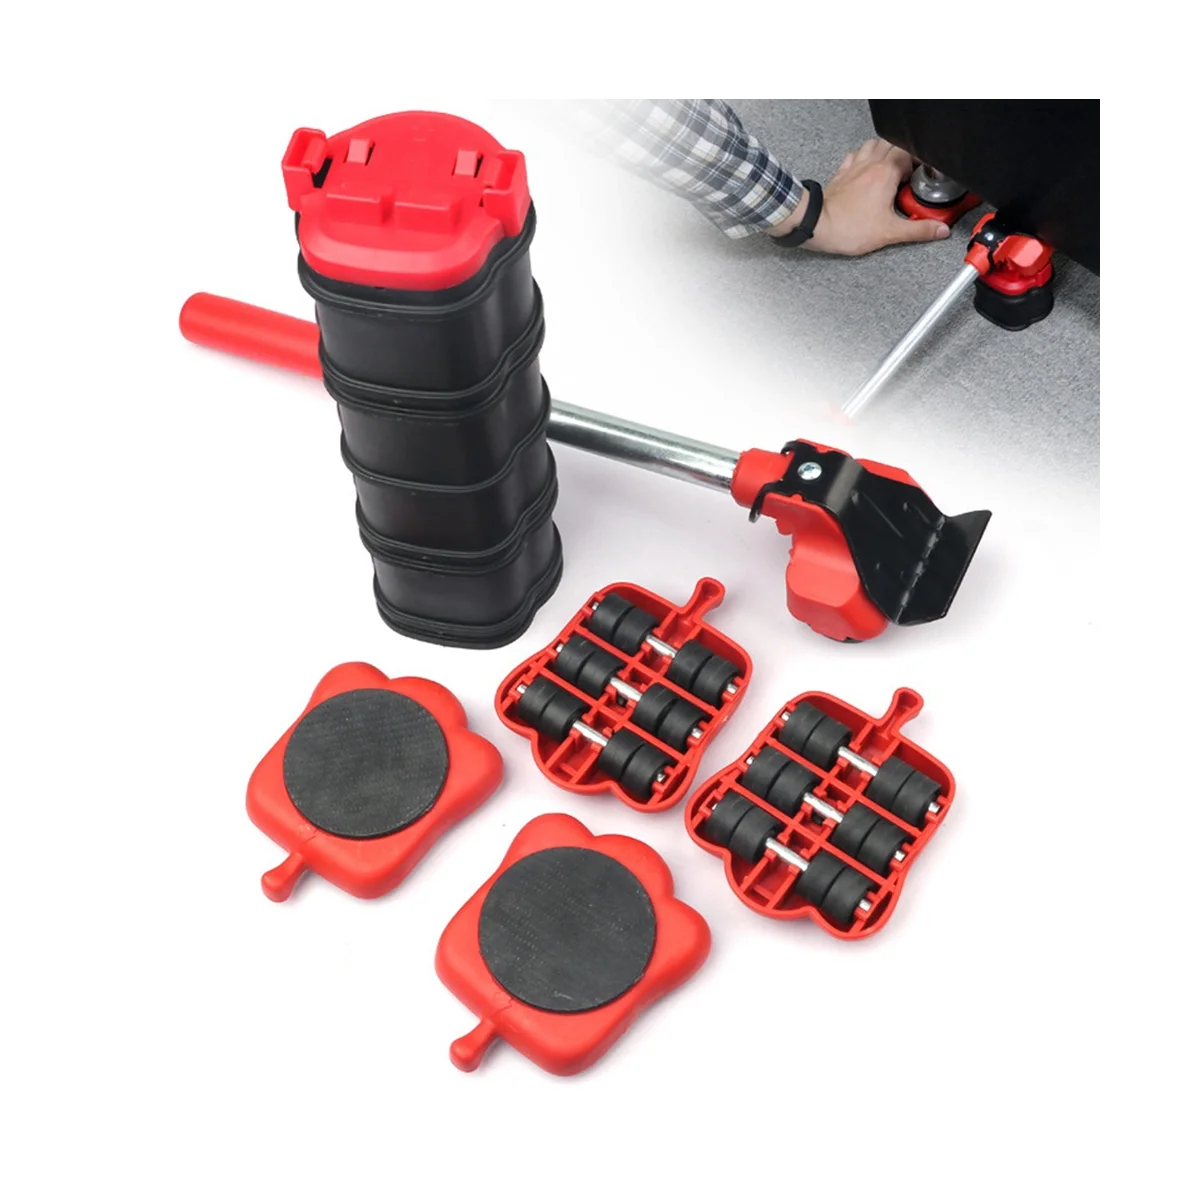 14PC Set Furniture Mover Tool Transport Set Transport Lifter Heavy Stuff Moving 4 Wheeled Mover Roller Hand Tools